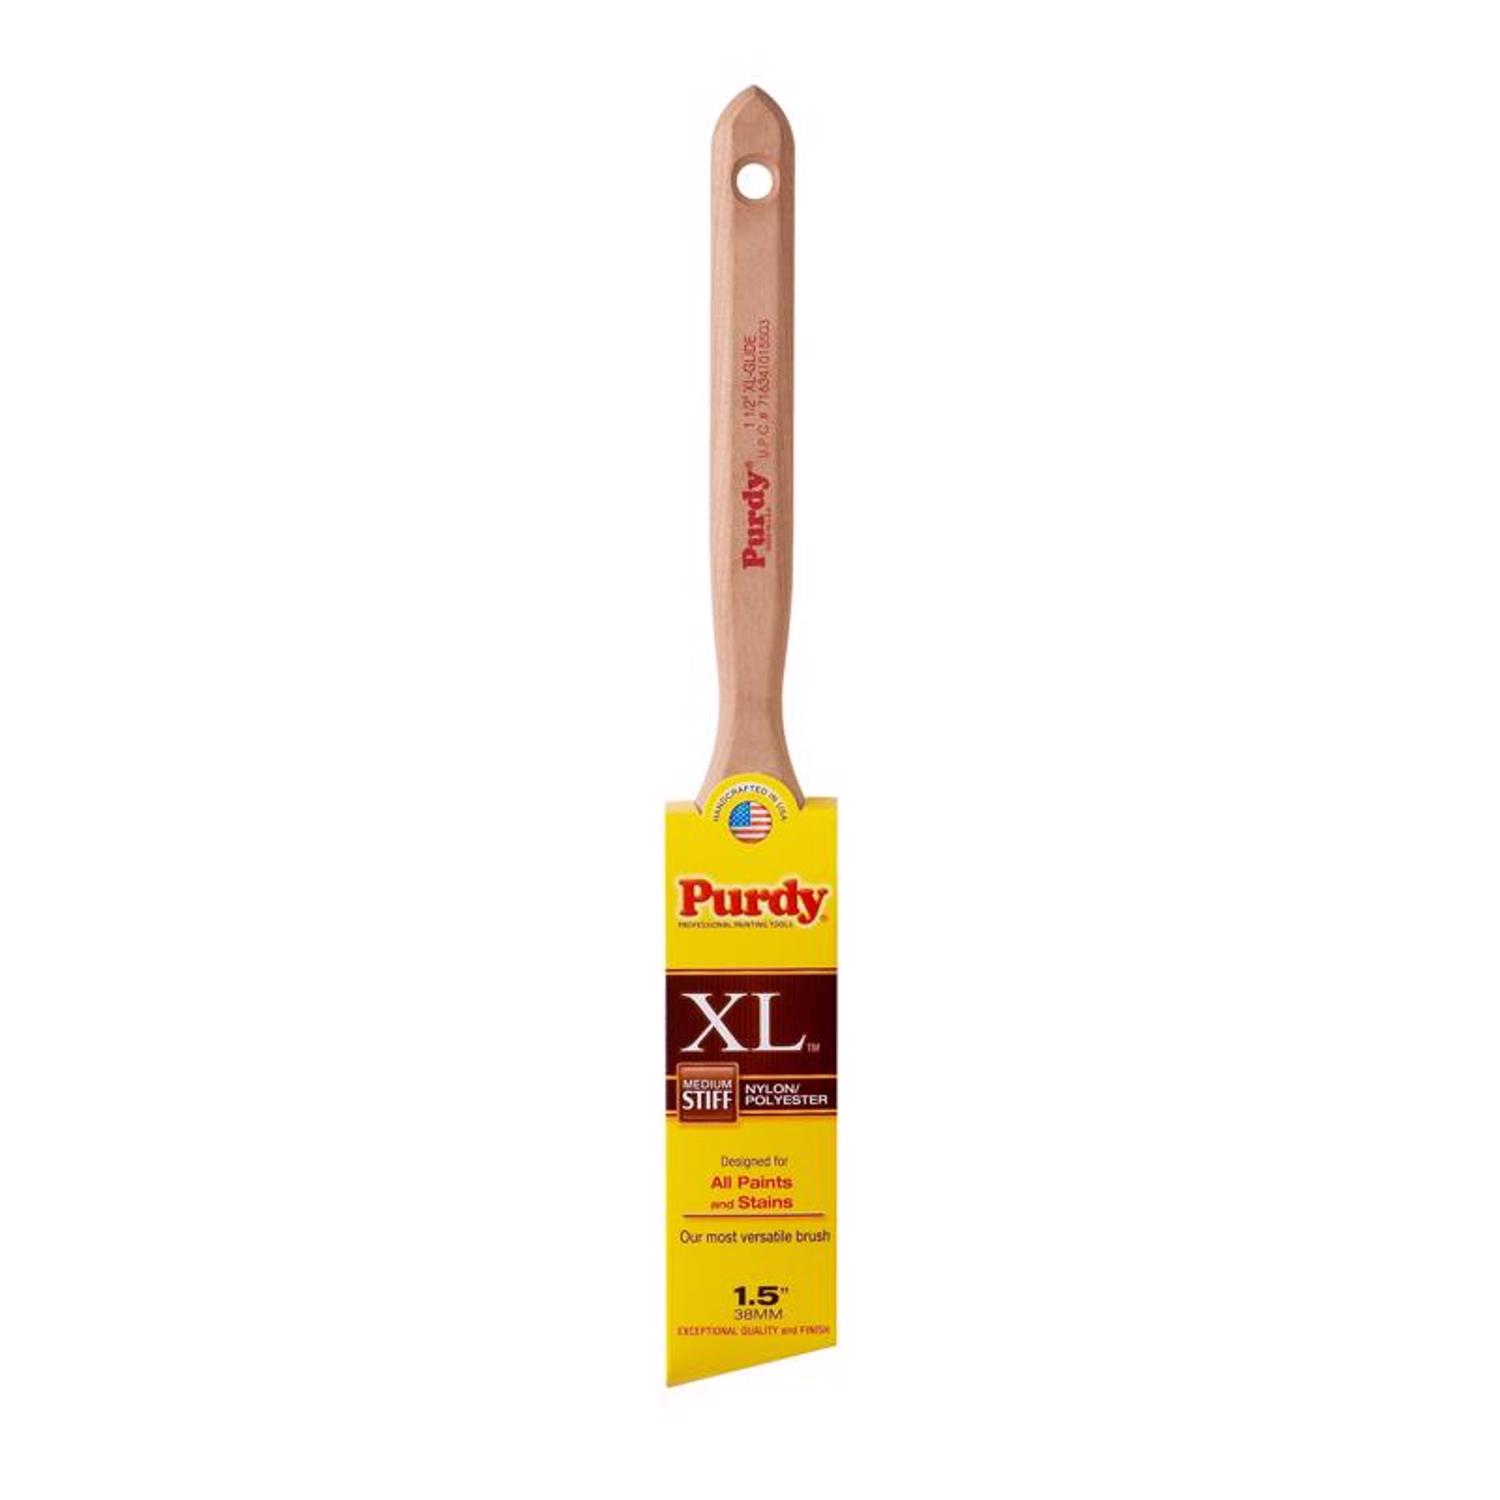 Photos - Putty Knife / Painting Tool Purdy XL Glide 1-1/2 in. Medium Stiff Angle Trim Paint Brush 144152315